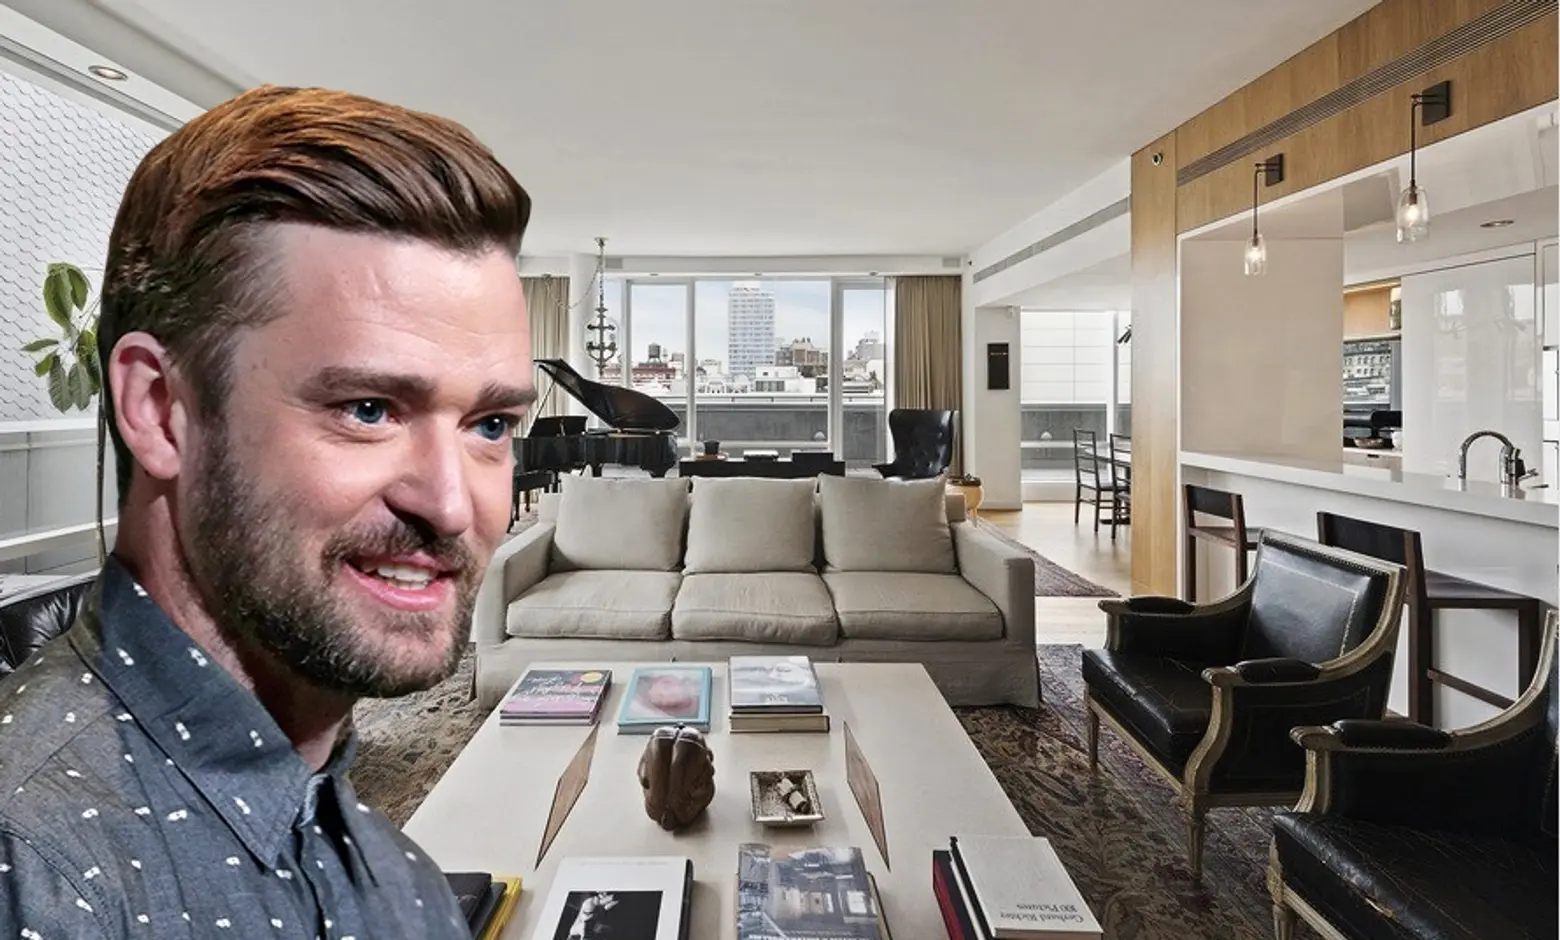 After four price cuts, Justin Timberlake sells Soho penthouse for $6.35M